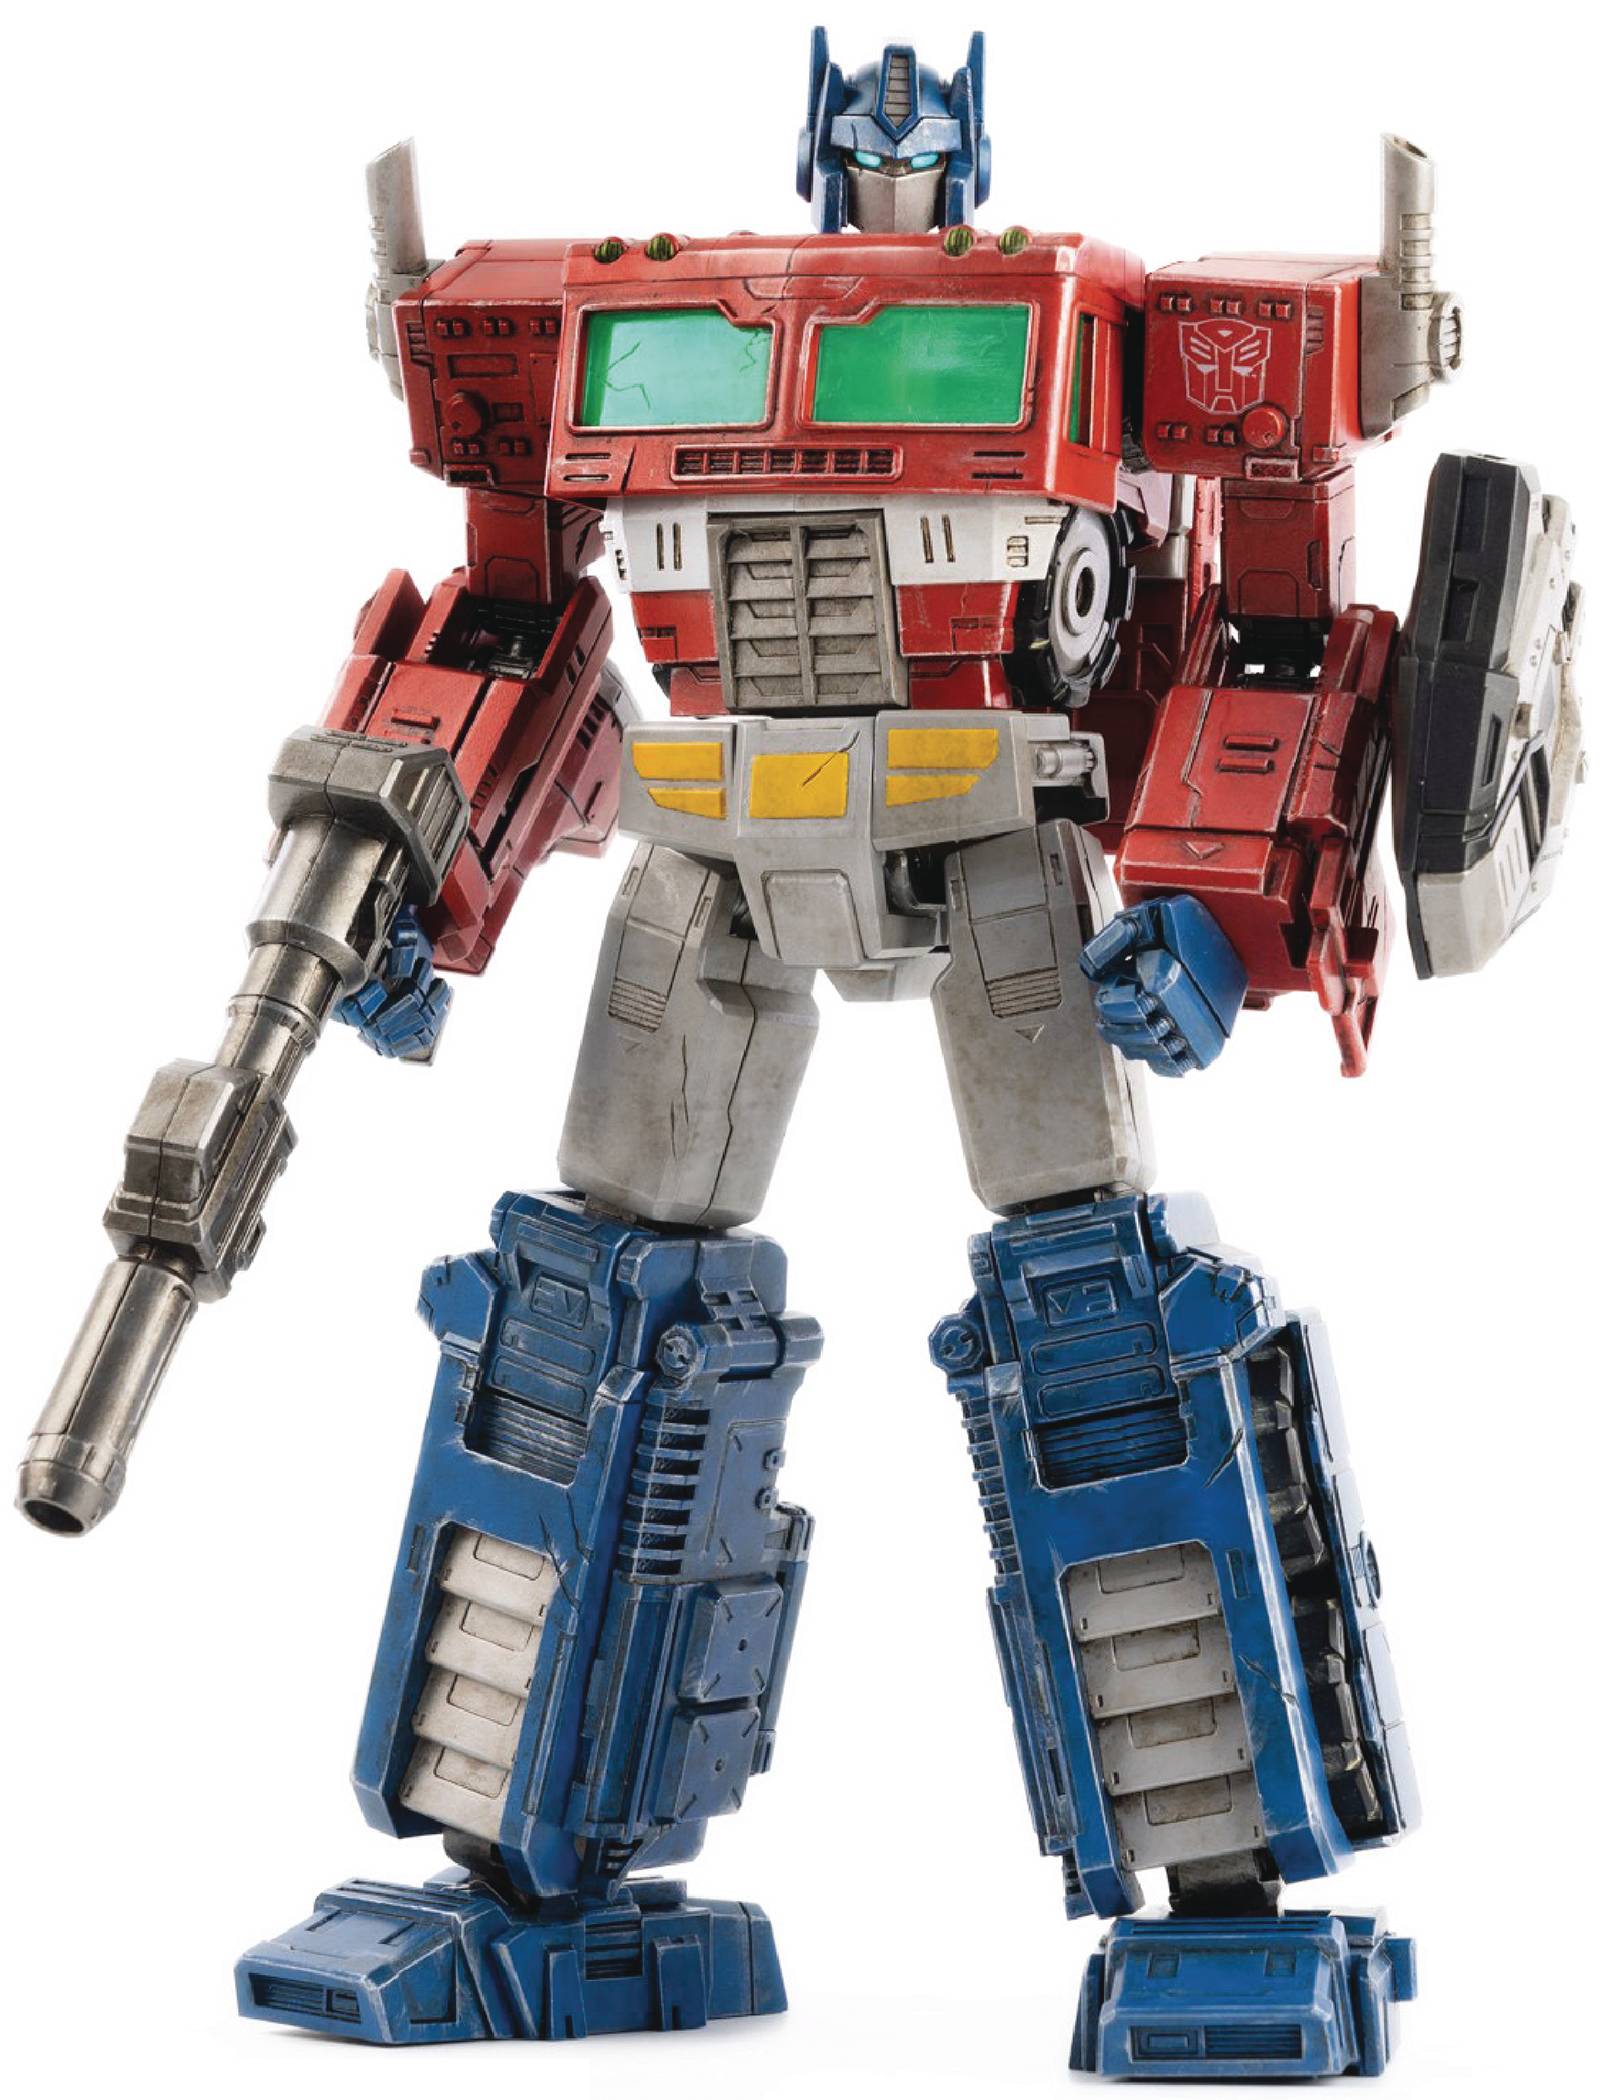 TRANSFORMERS WAR FOR CYBERTRON OPTIMUS PRIME DLX SCALE FIG (